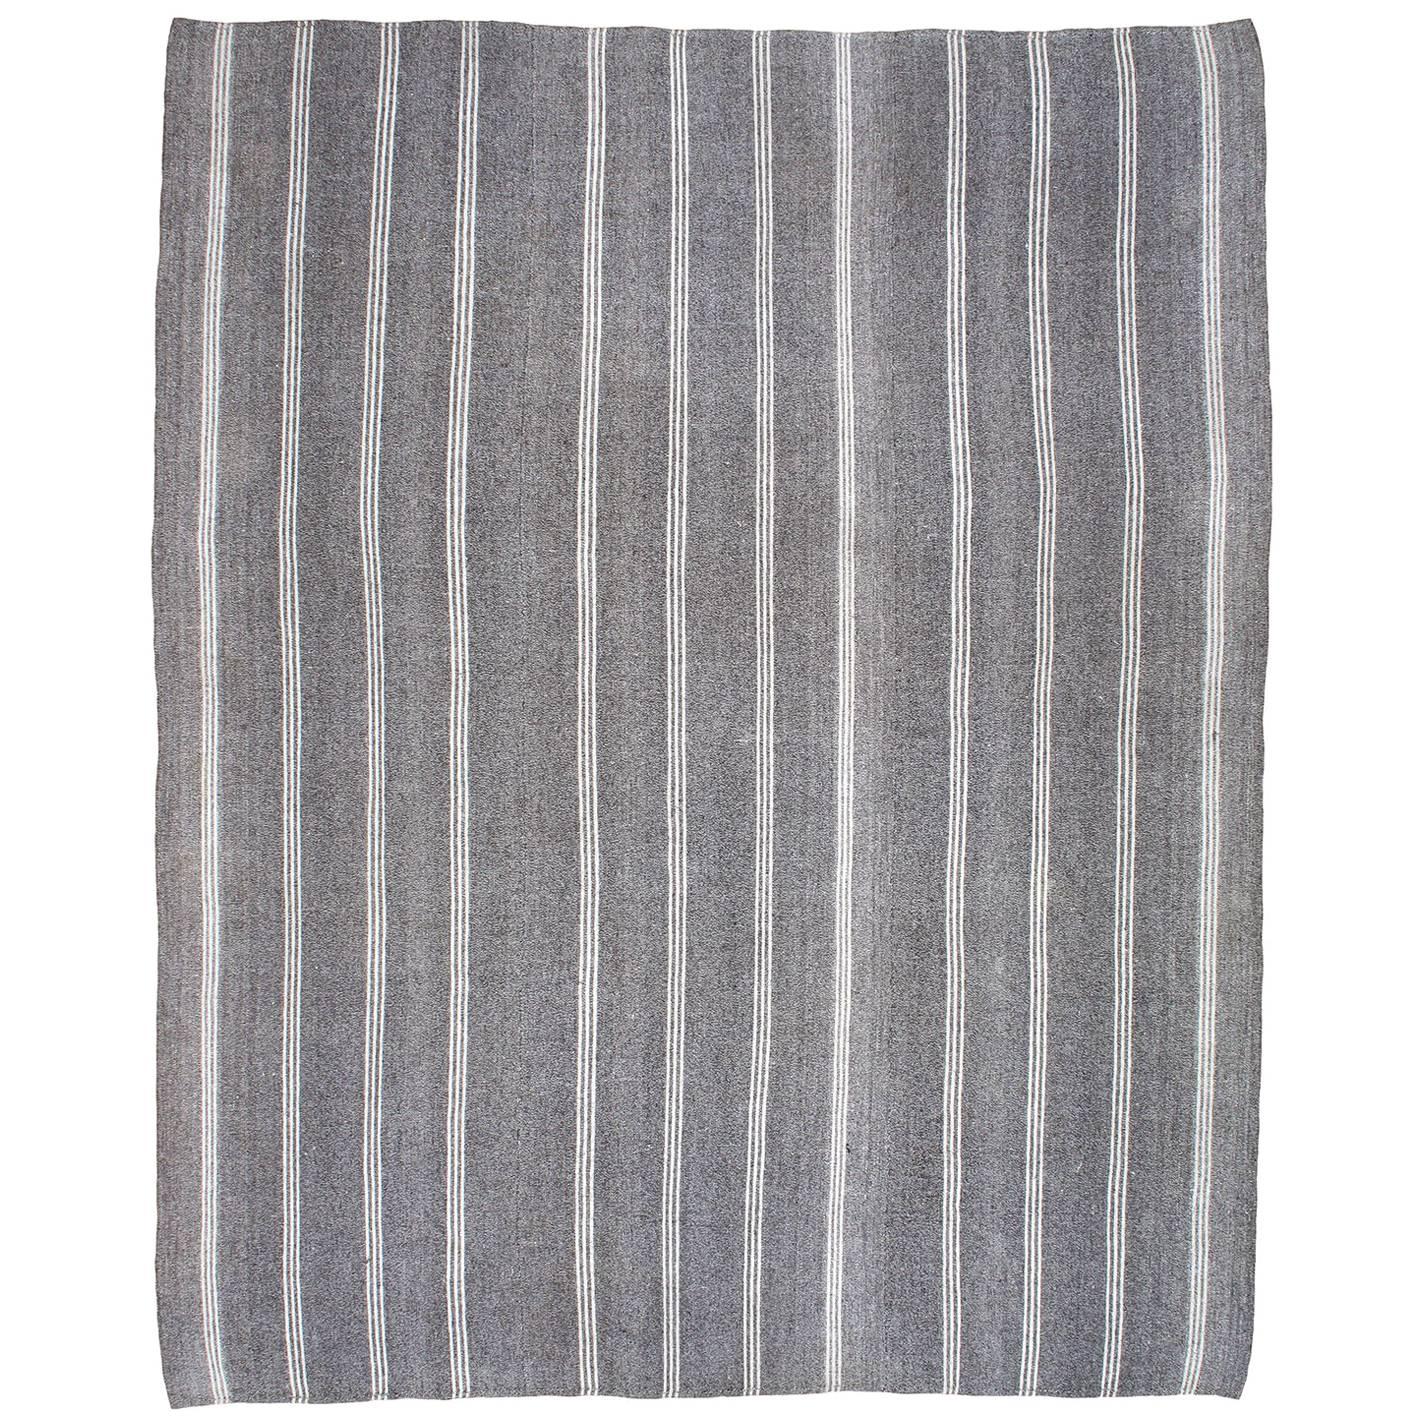 Kilim Rug with Vertical Stripes in White Cotton